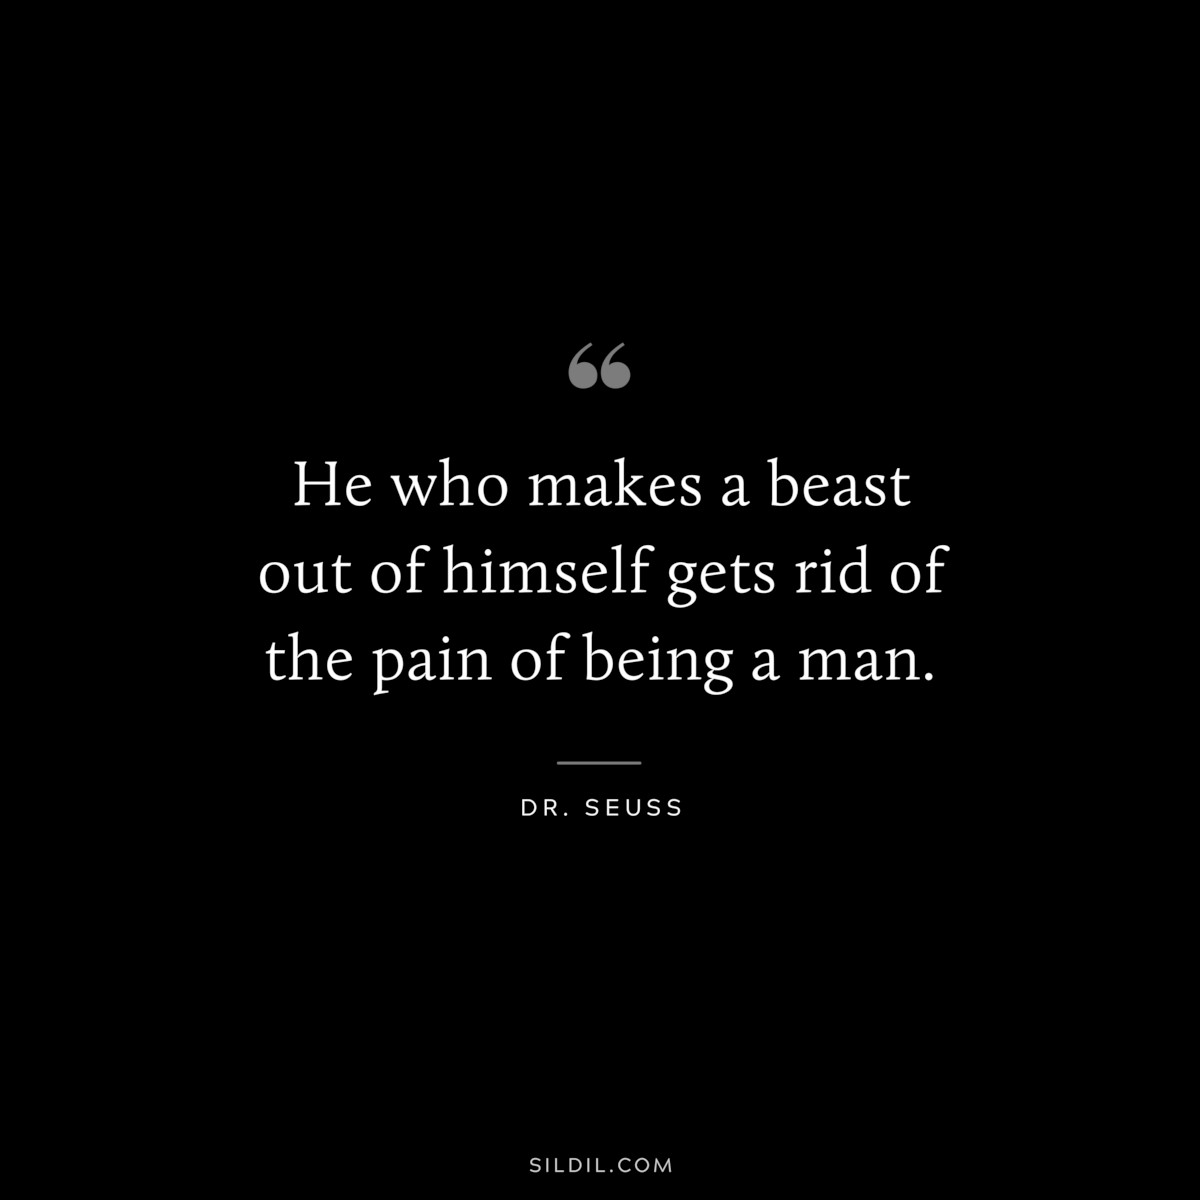 He who makes a beast out of himself gets rid of the pain of being a man. ― Dr. Seuss